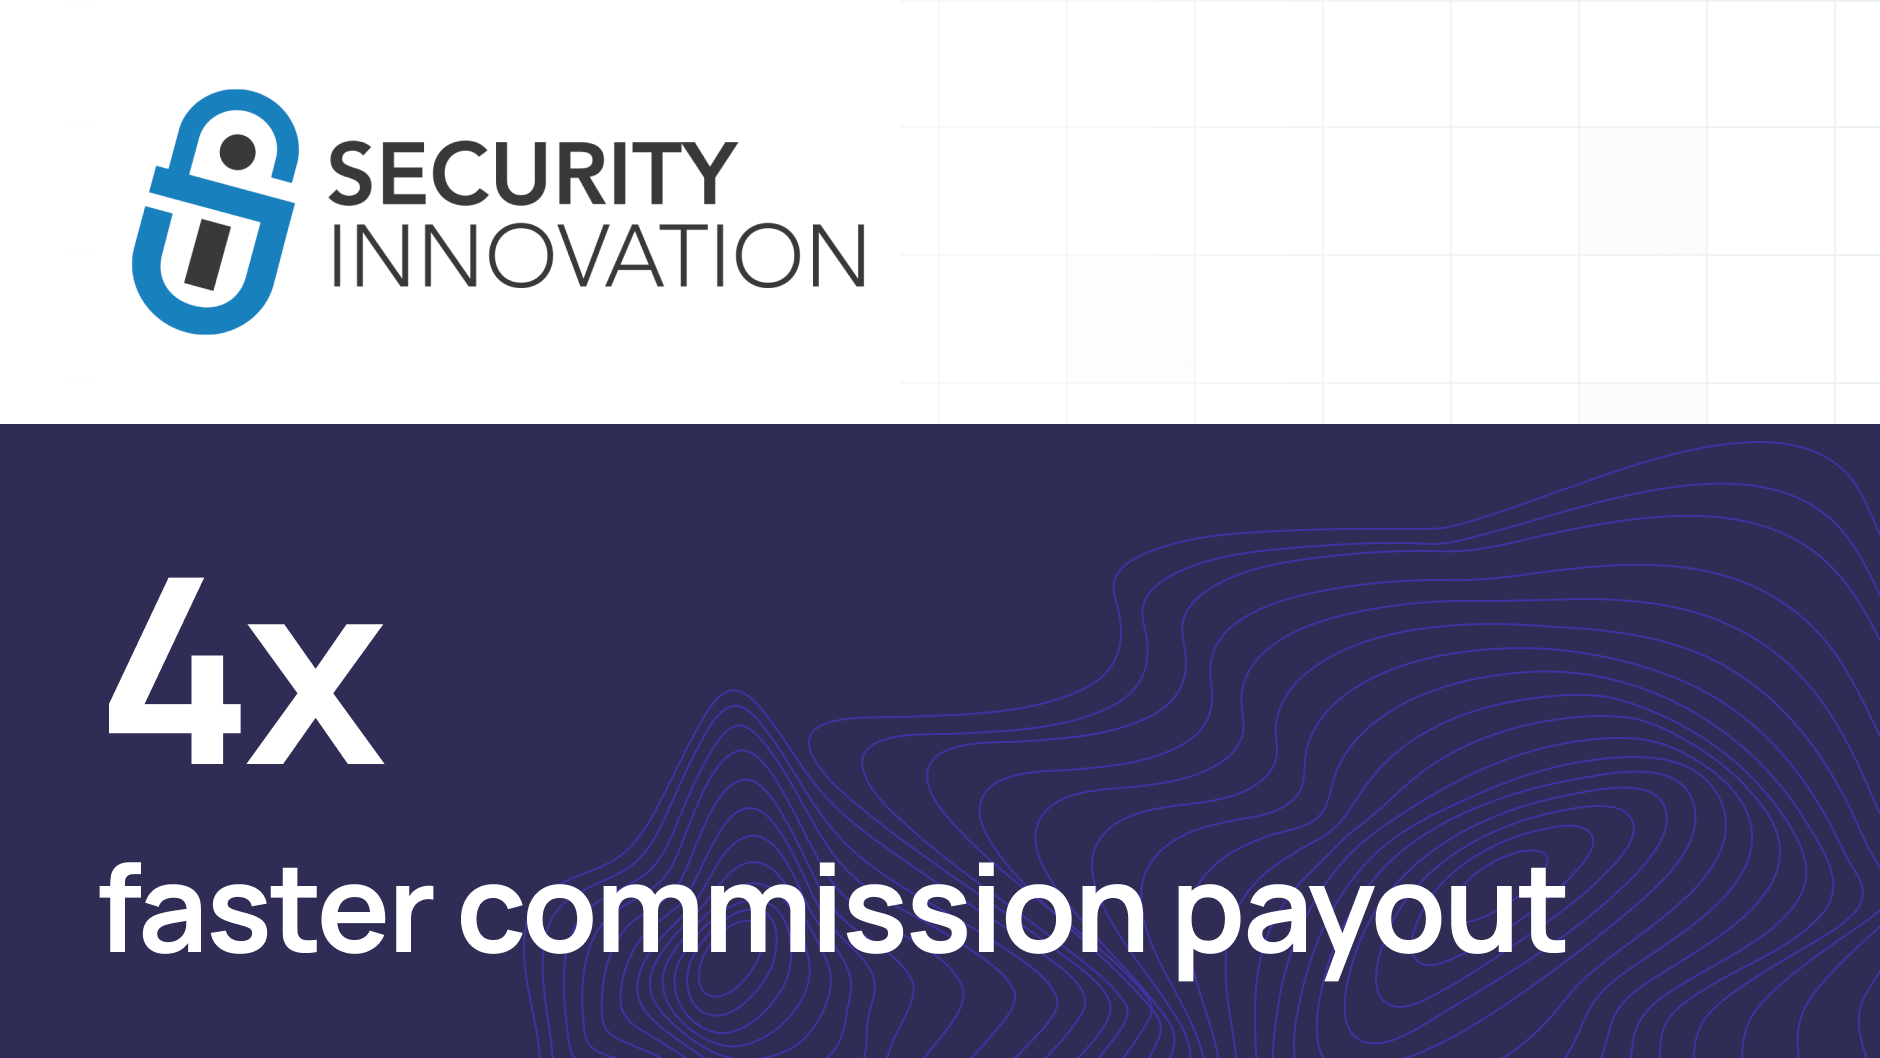 Security Innovation increases commissions efficiency and visibility with ElevateHQ